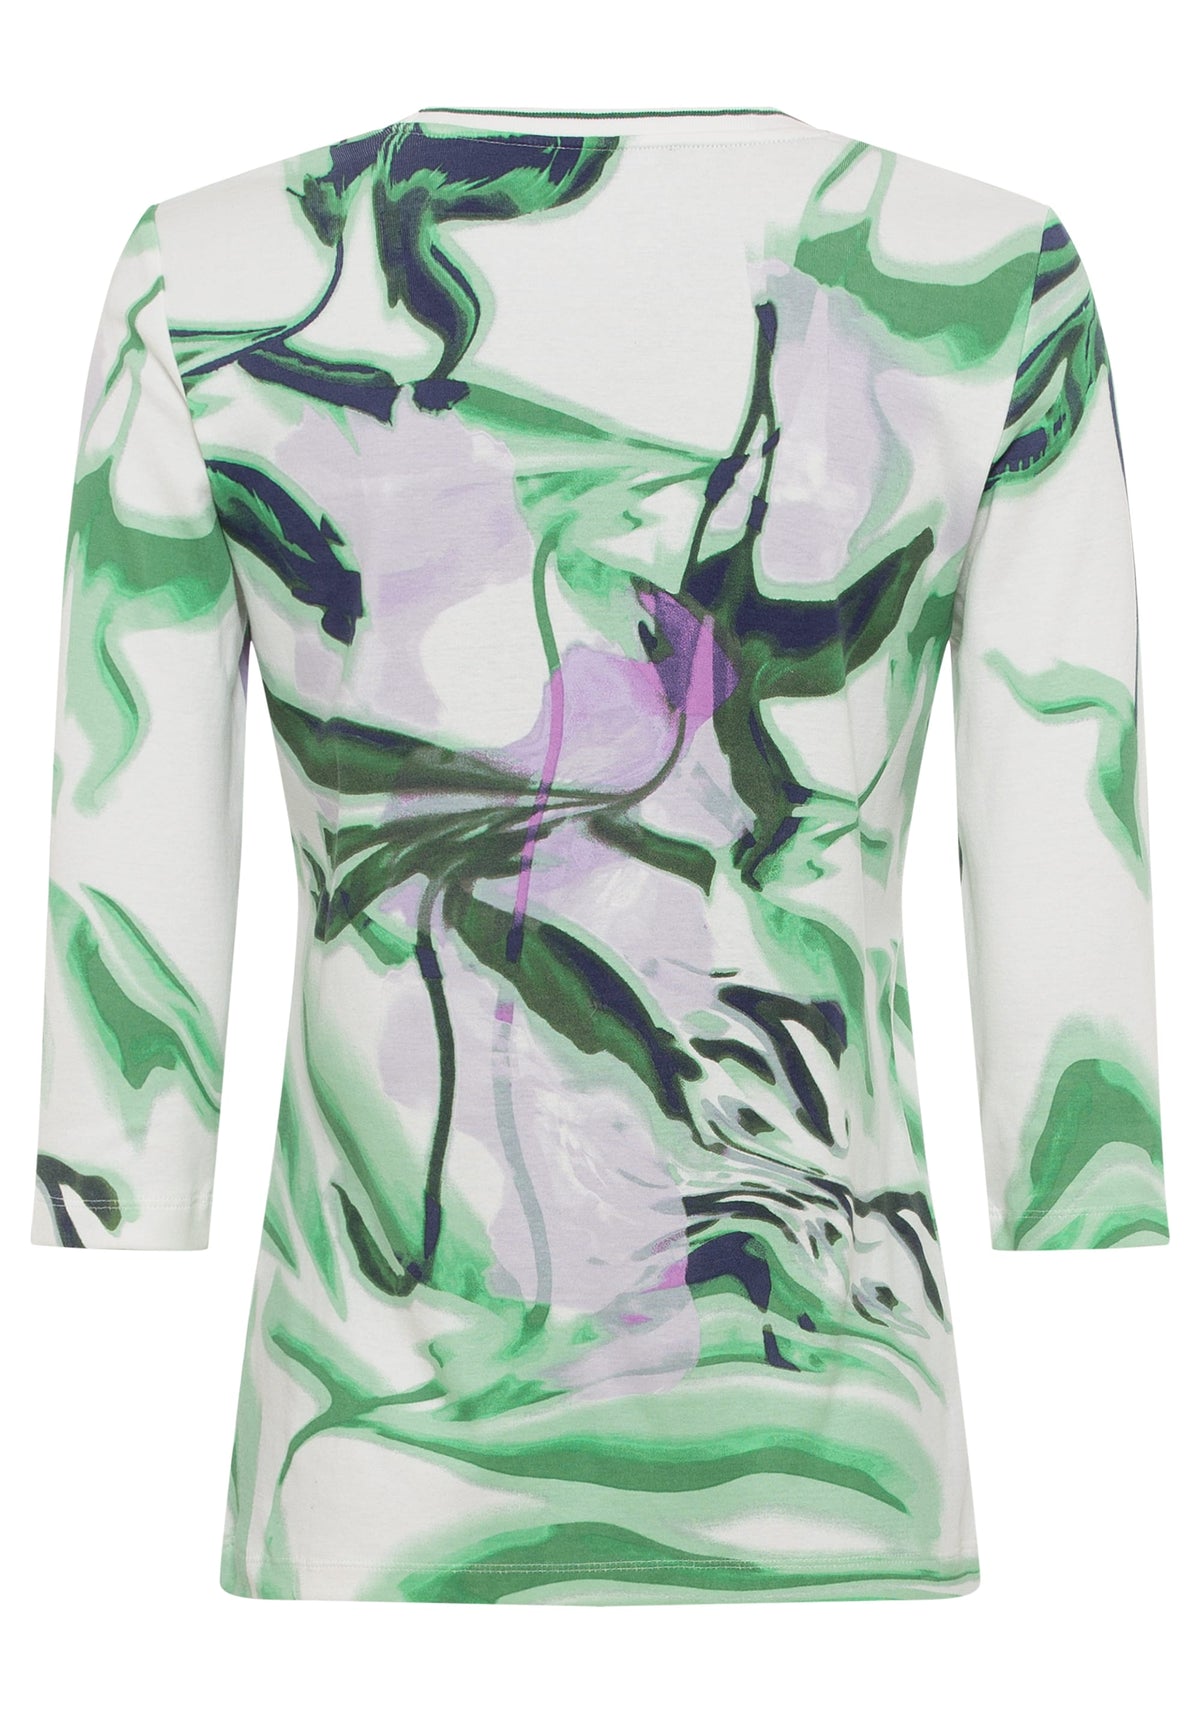 100% Cotton 3/4 Sleeve Watercolour Abstract Floral T-Shirt